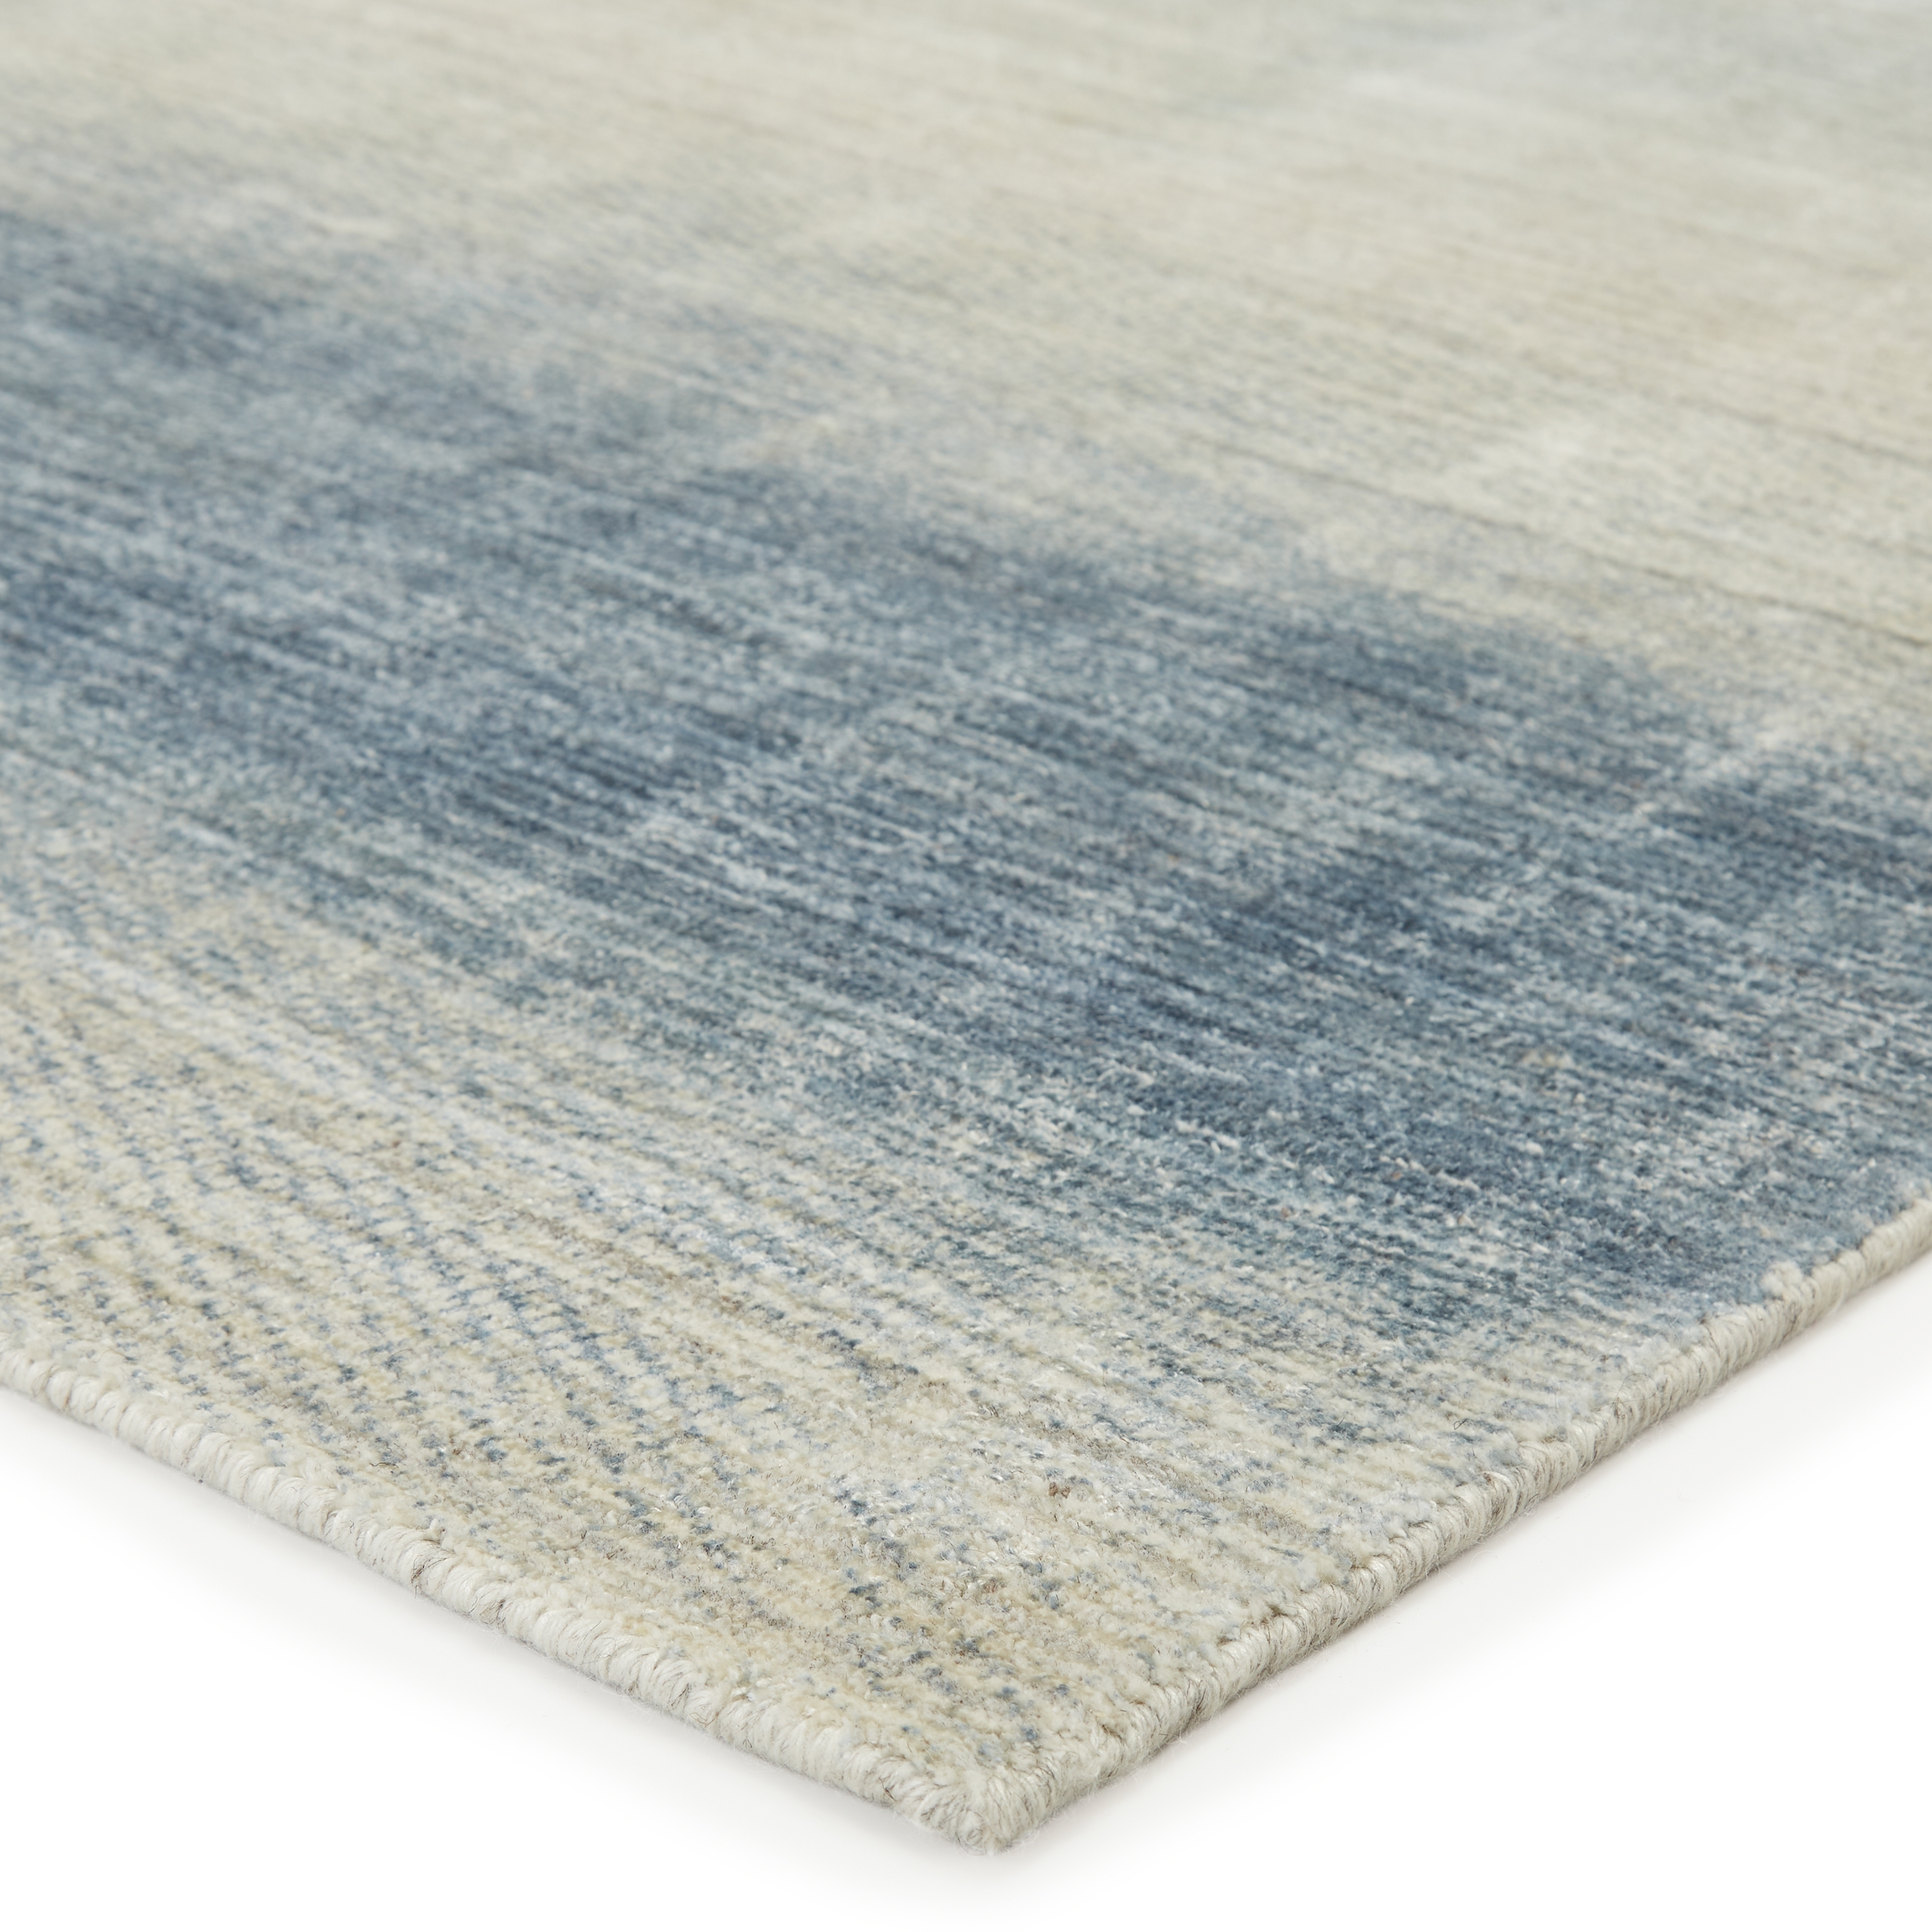 Barclay Butera by Bayshores Handmade Ombre Blue/ Beige Area Rug (8'X10') - Image 1